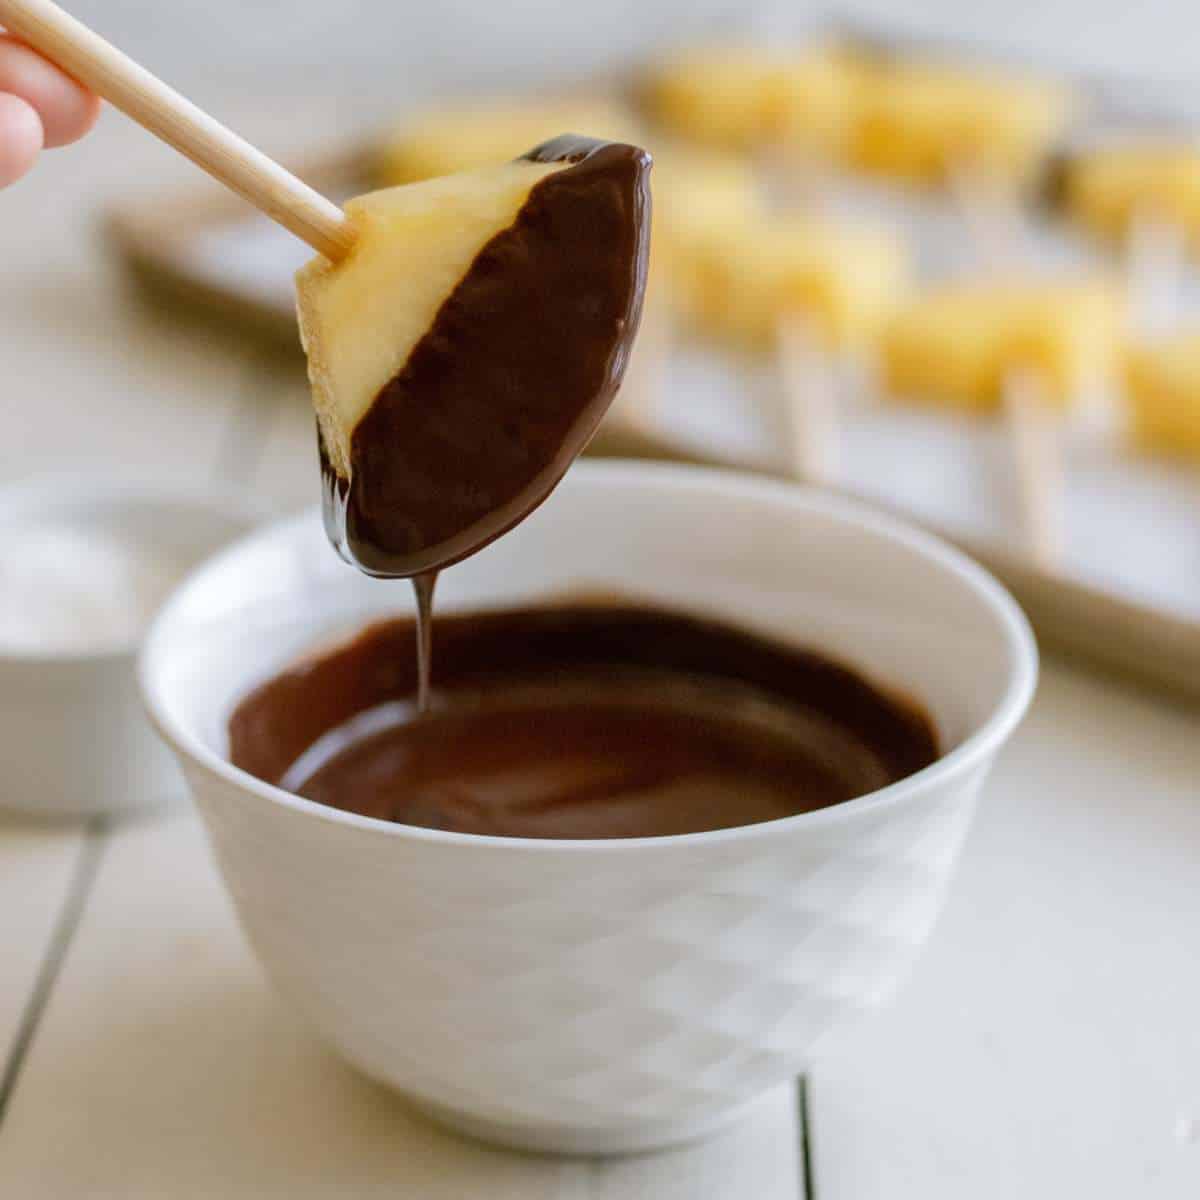 Pineapple slice on a candy apple stick dipped into a bowl of melted chocolate.